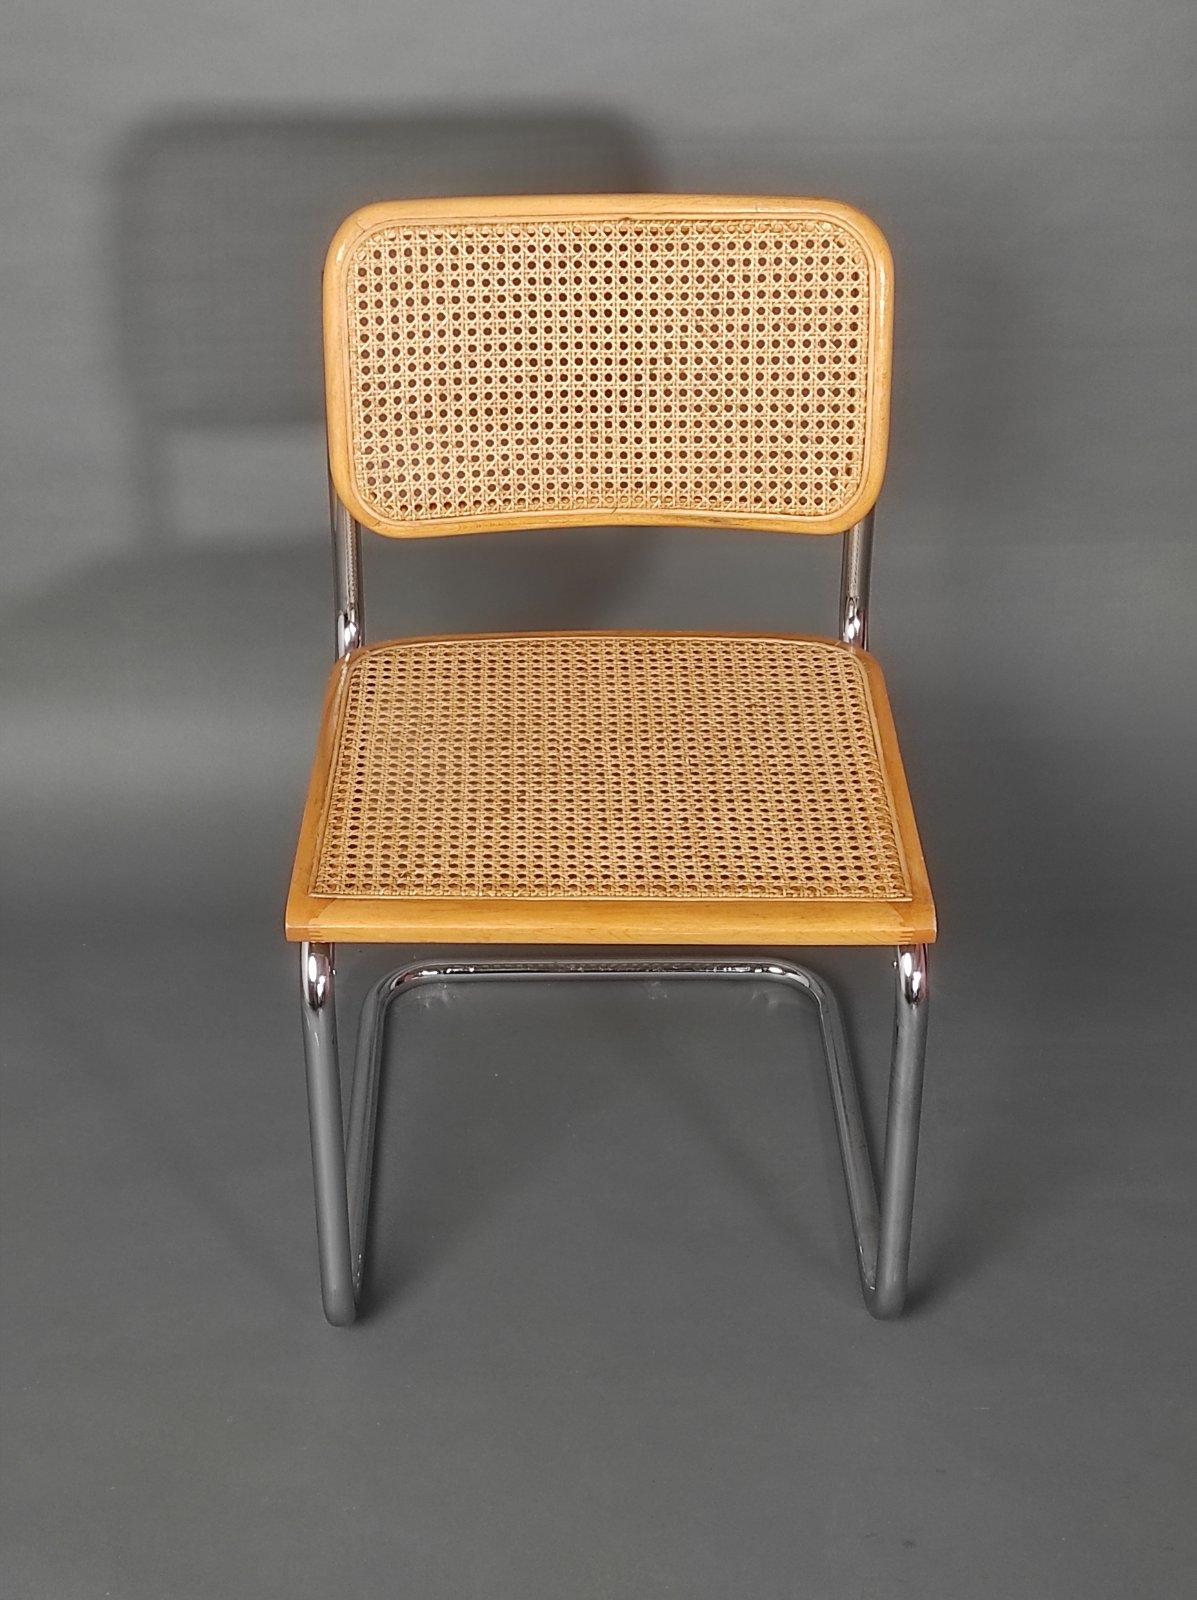 Mid-20th Century Italian Cesca Chair 1952 After Marcel Breuer For Sale